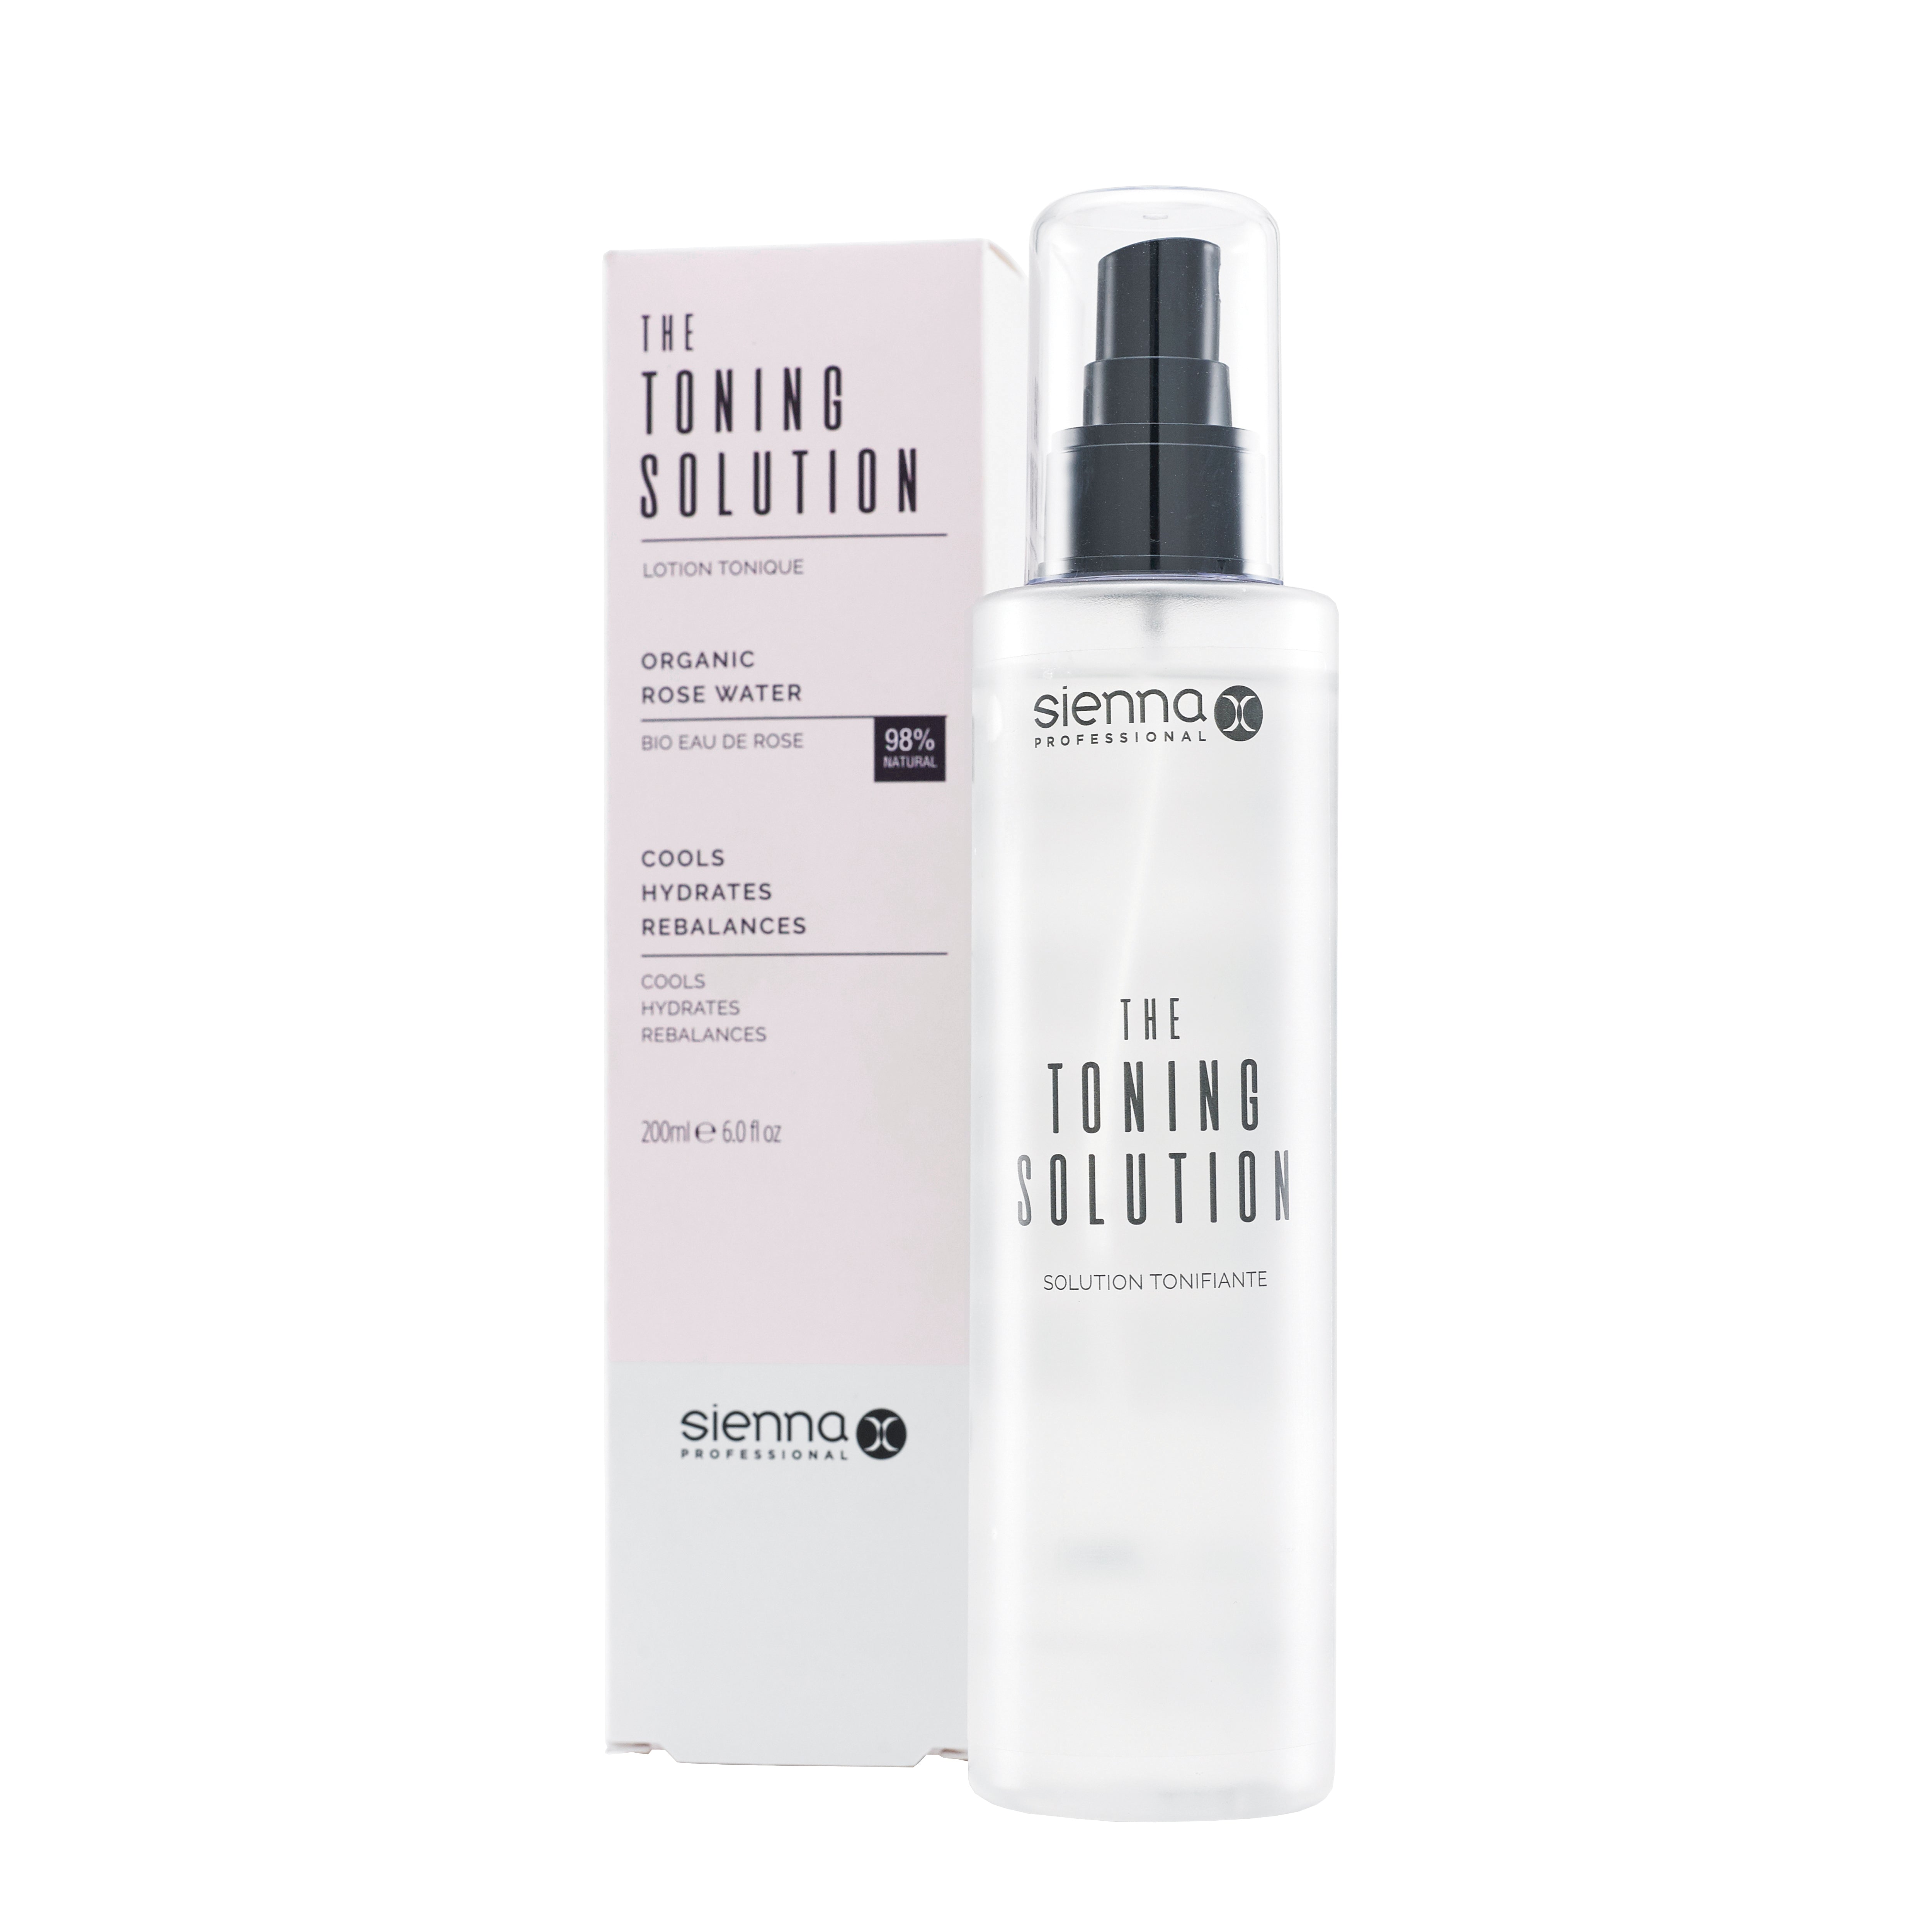 The Toning Solution